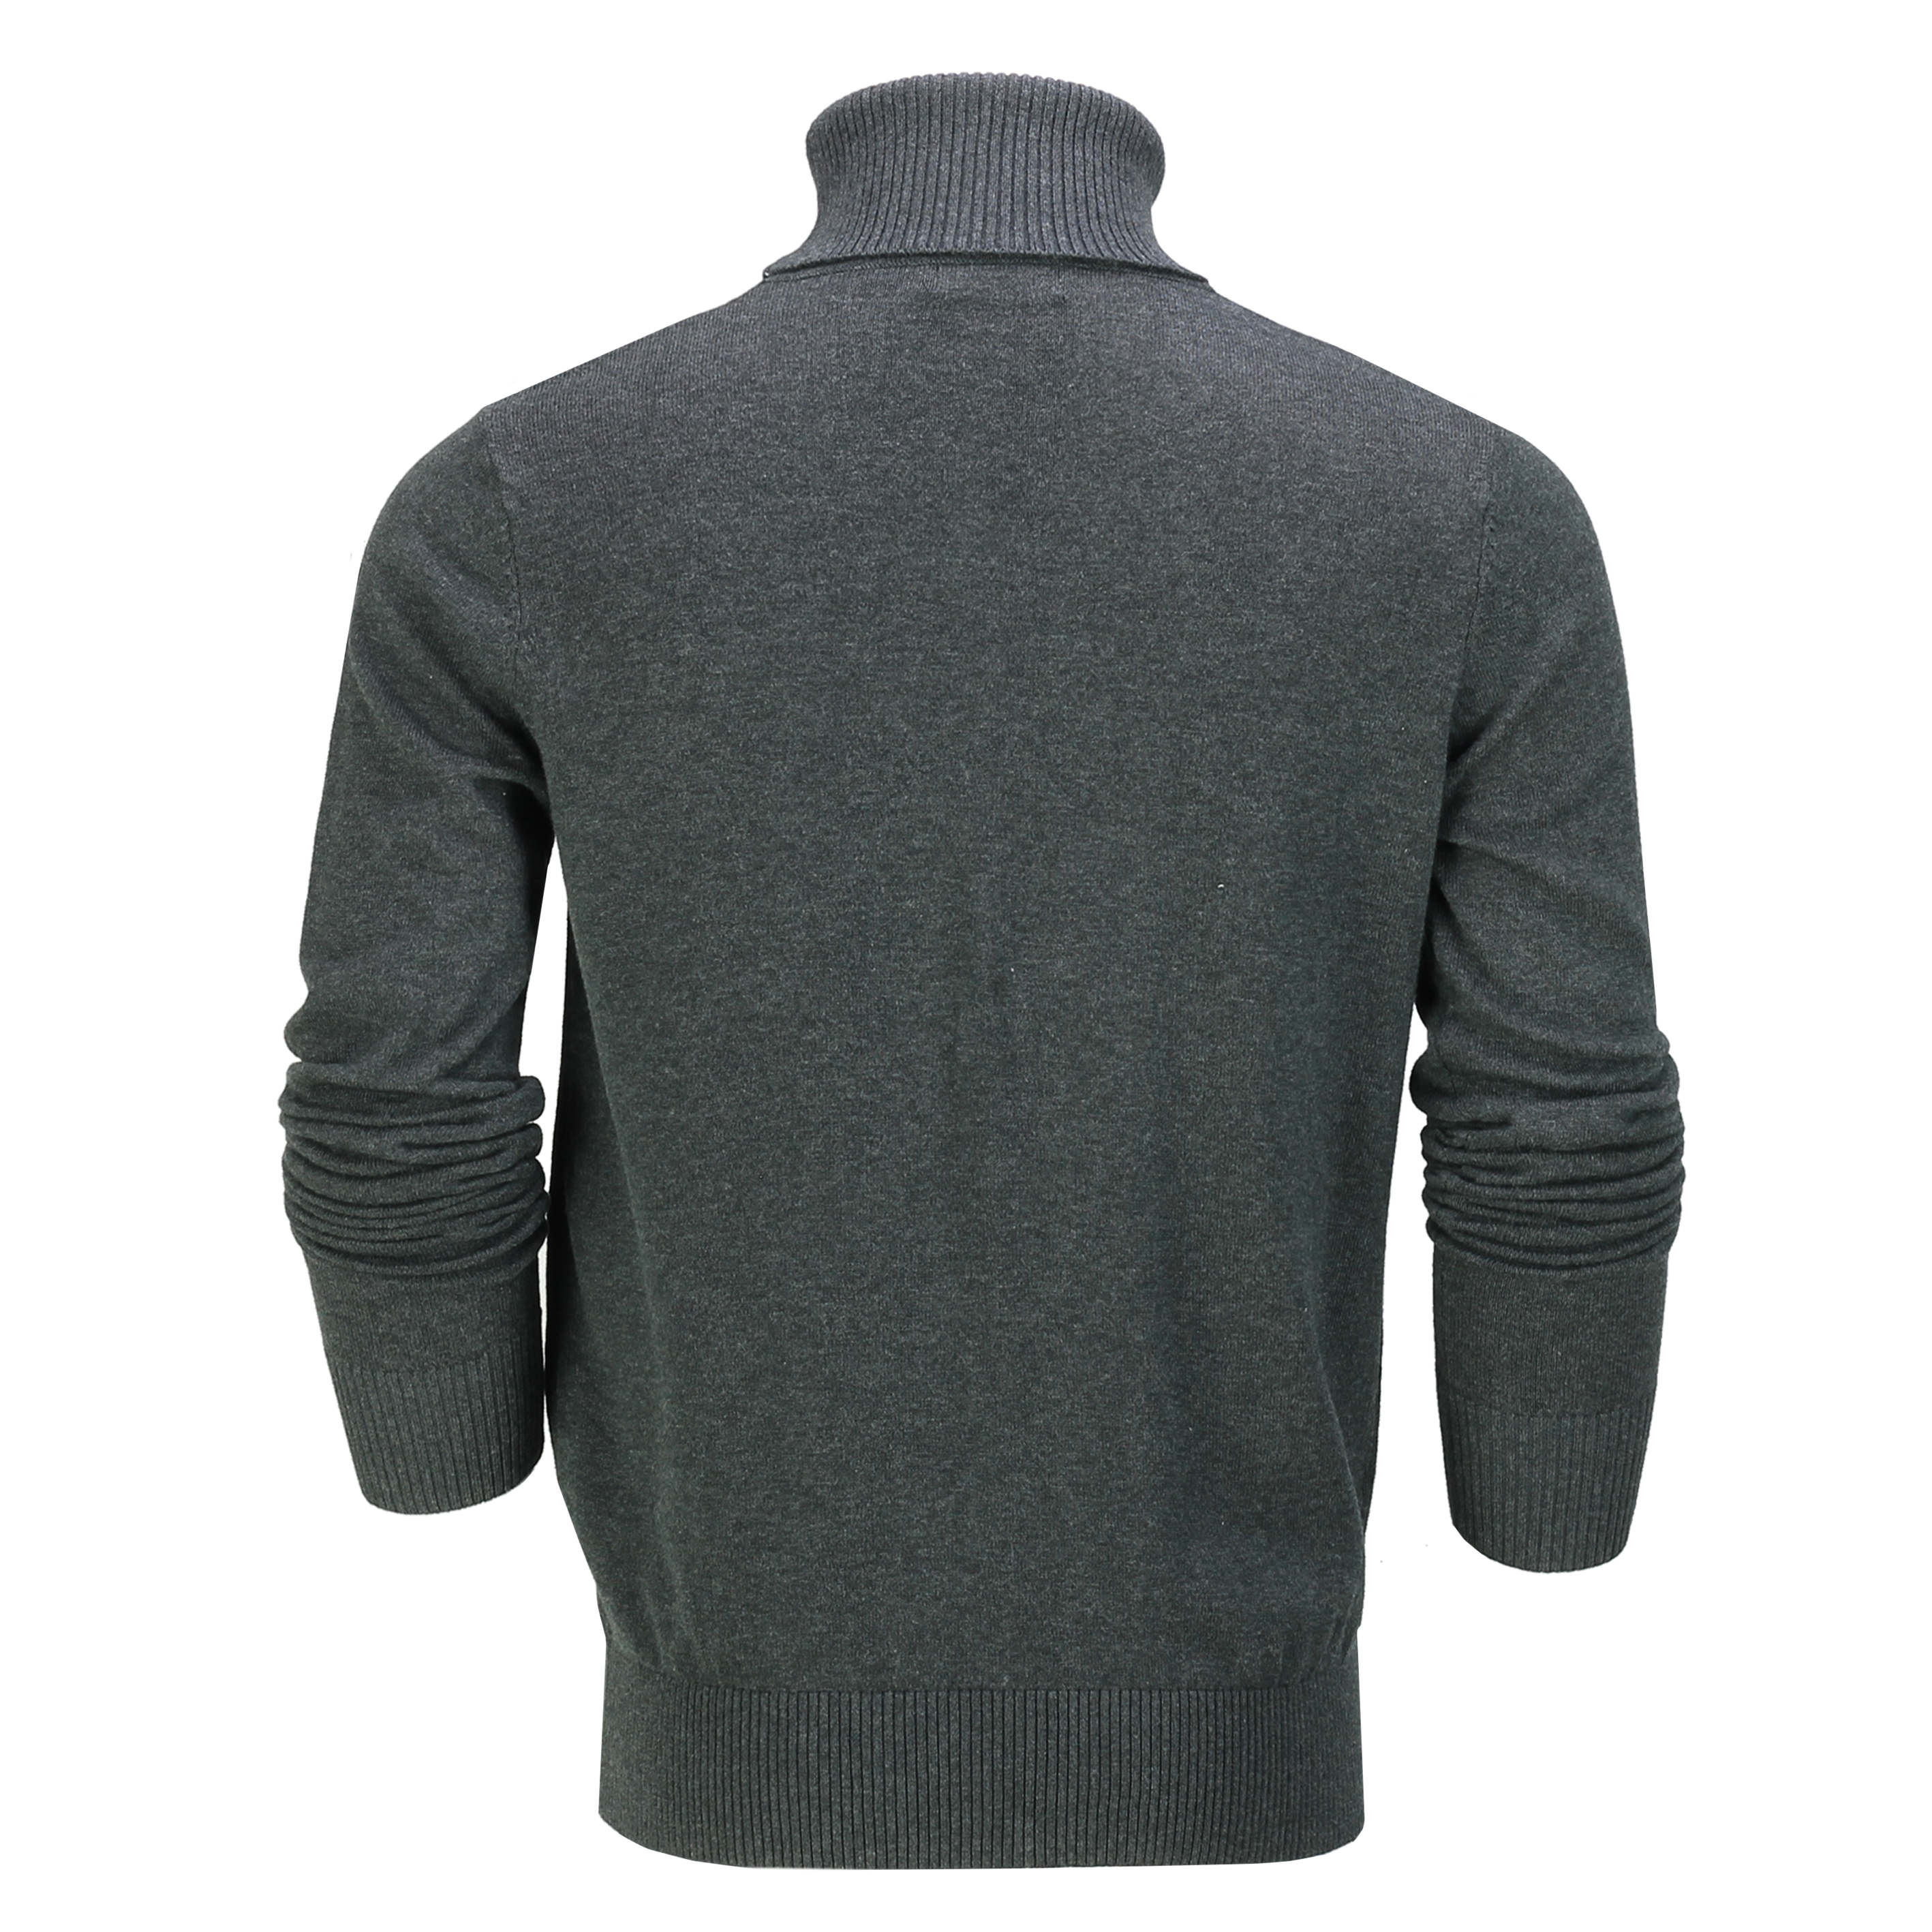 Mens Roll Neck Grey Jumper Soft Cotton Fine Knitted